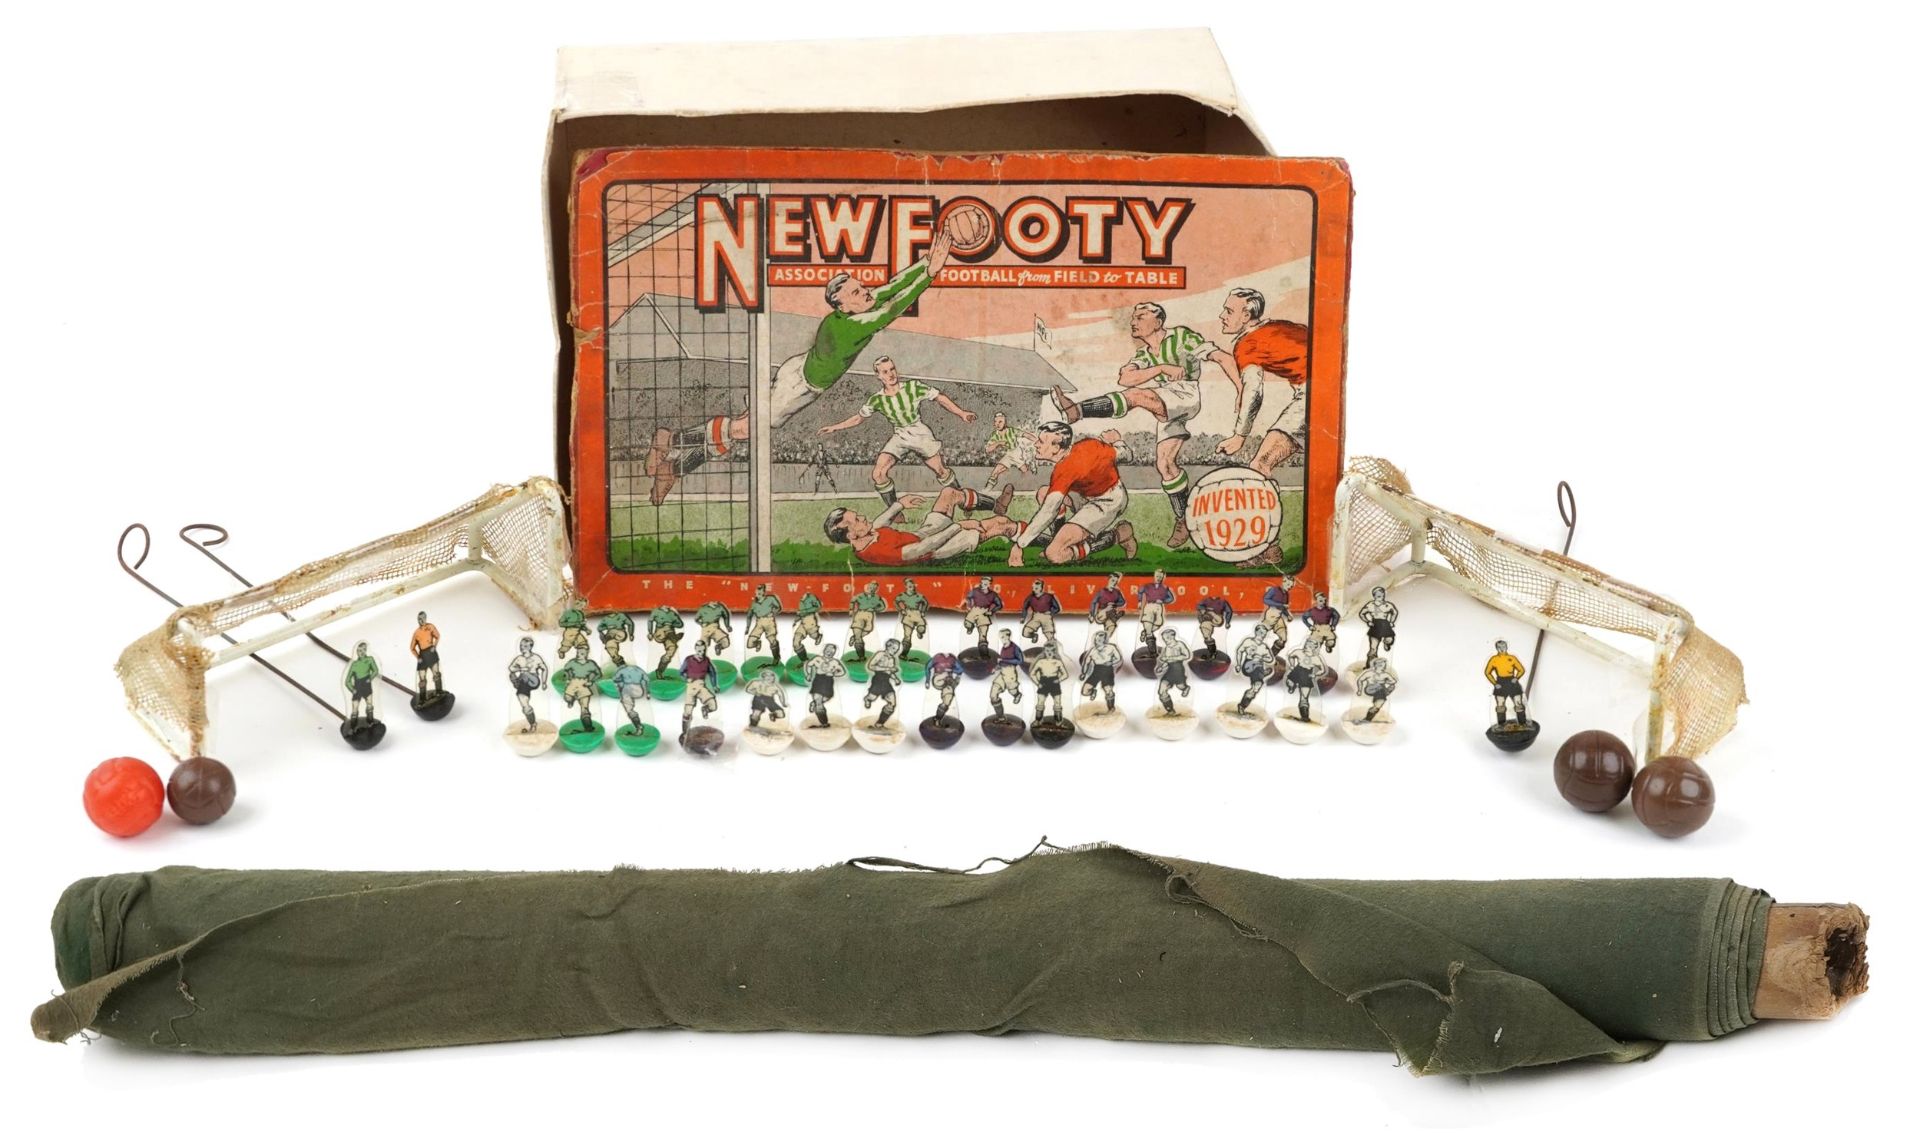 Early 20th century New Footy table soccer game with box and grass by The New Footy Co Liverpool :